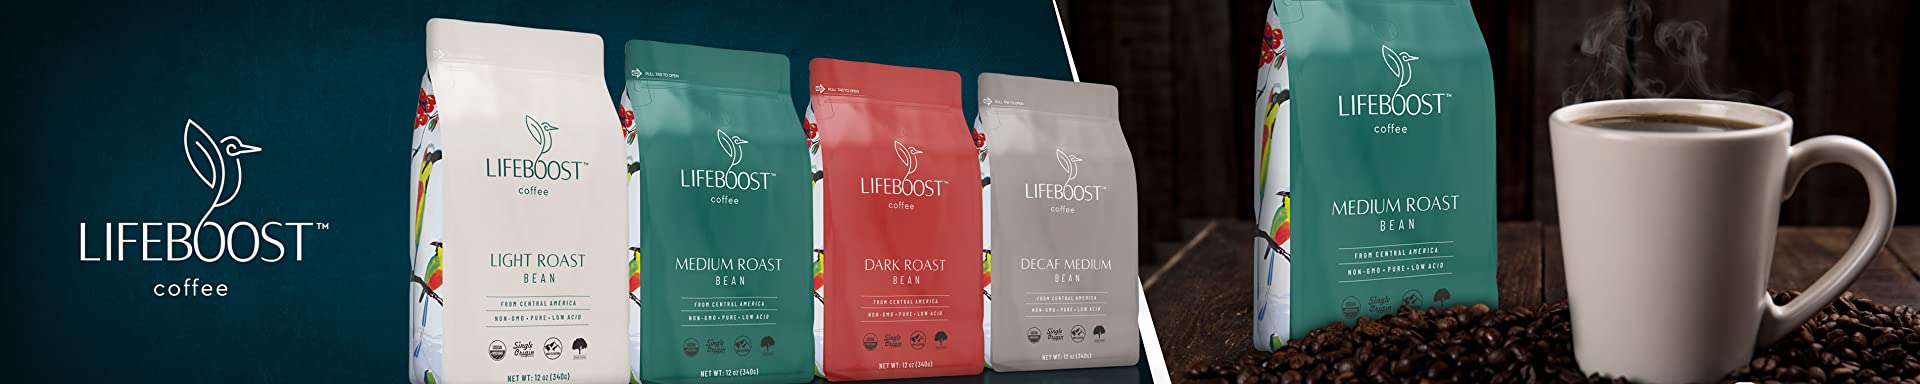 Lifeboost Coffee Guide